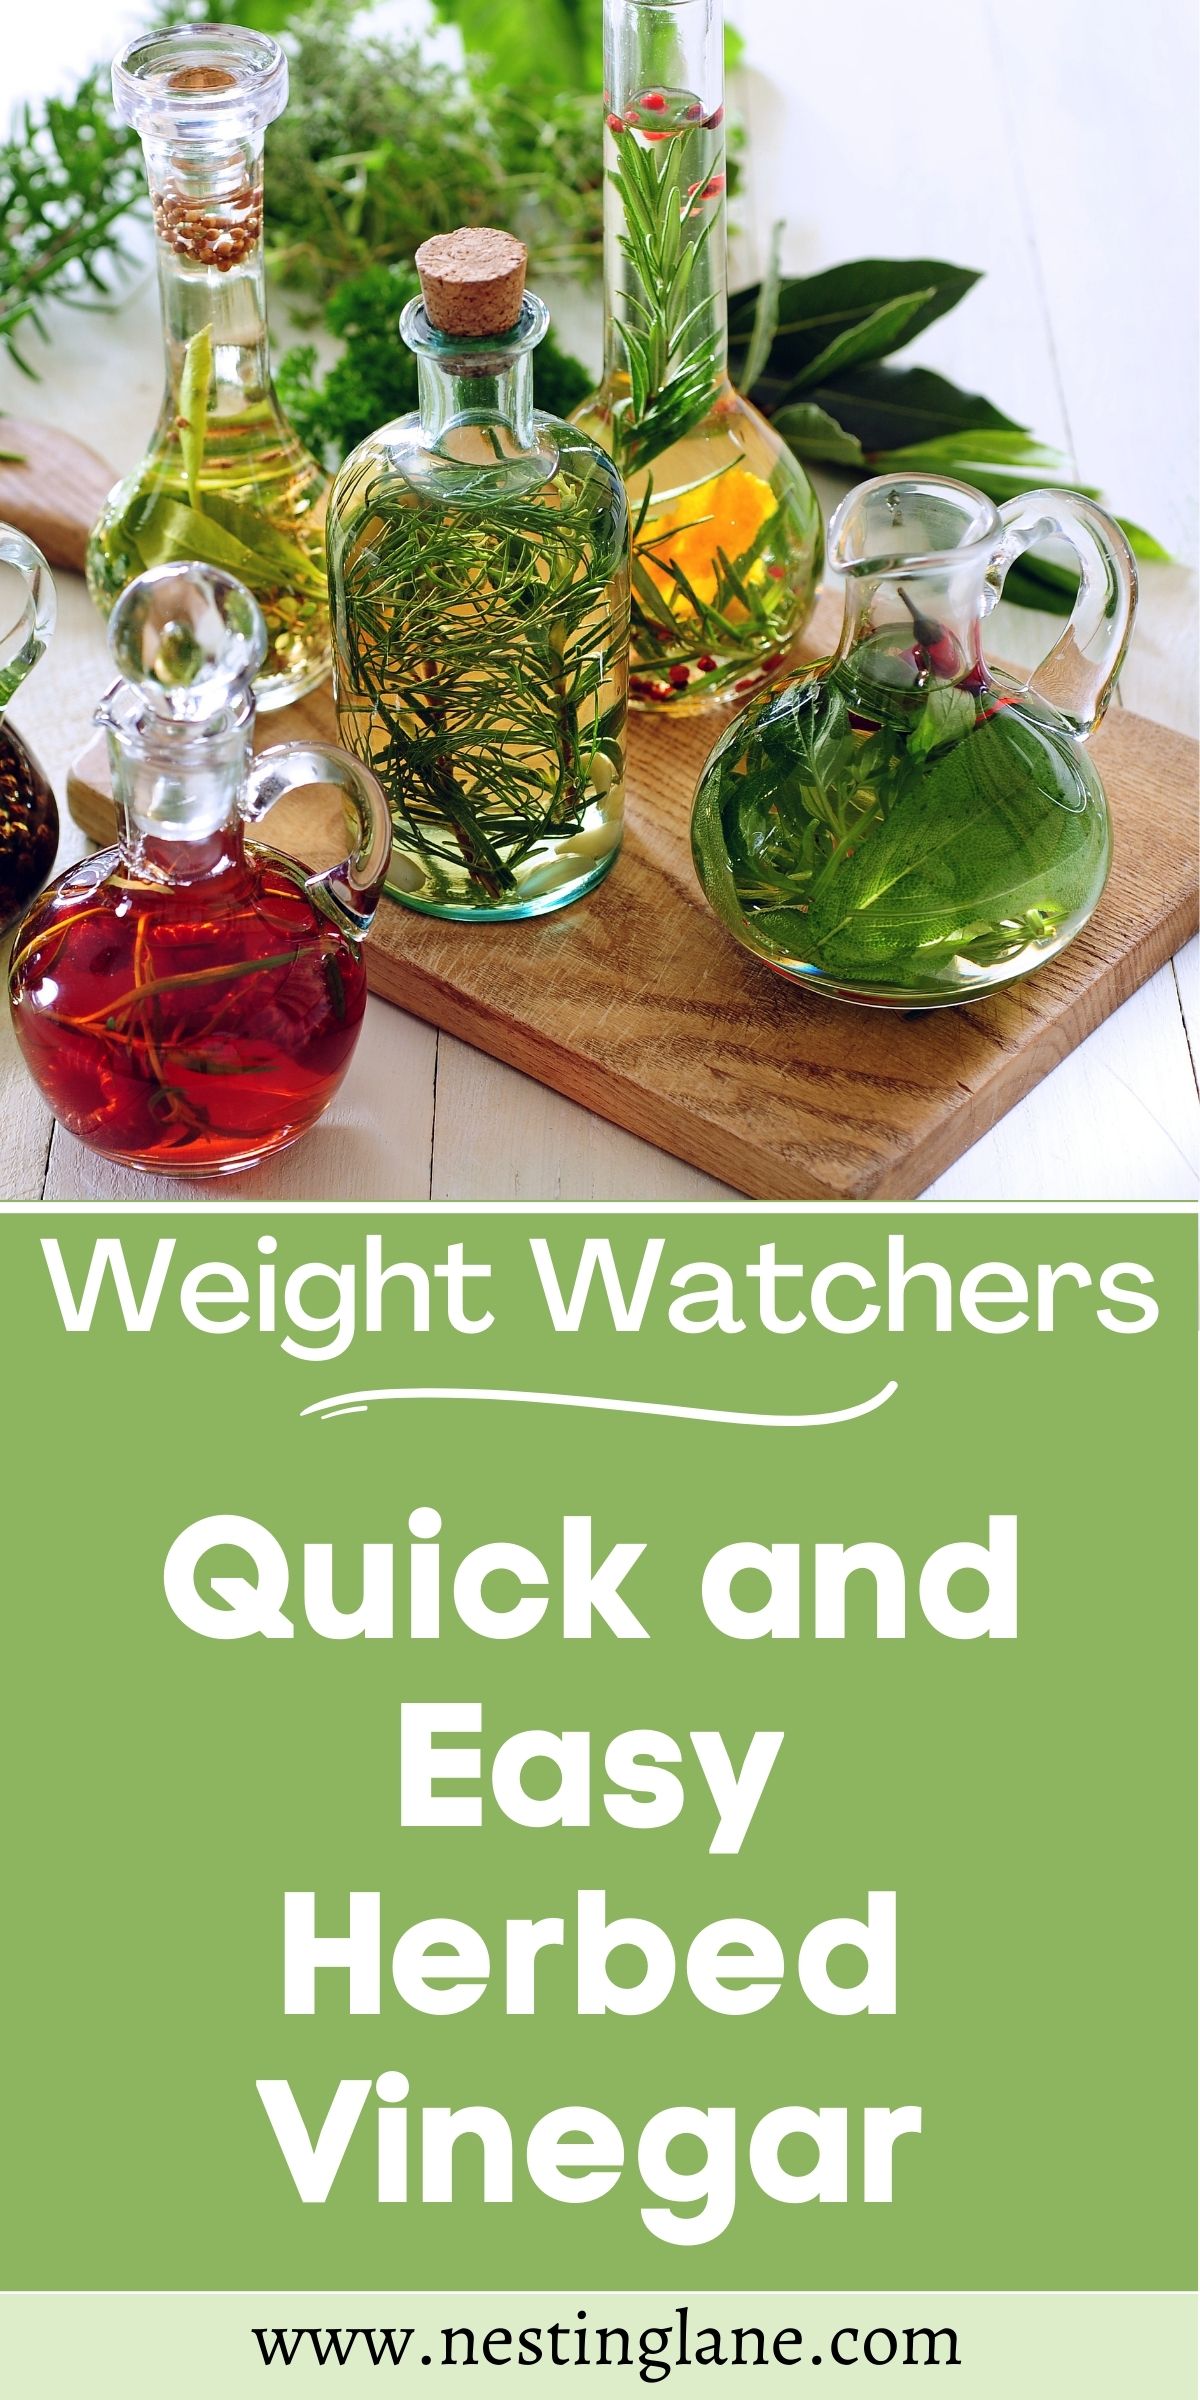 Graphic for Pinterest of Quick and Easy Weight Watchers Herbed Vinegar Recipe.